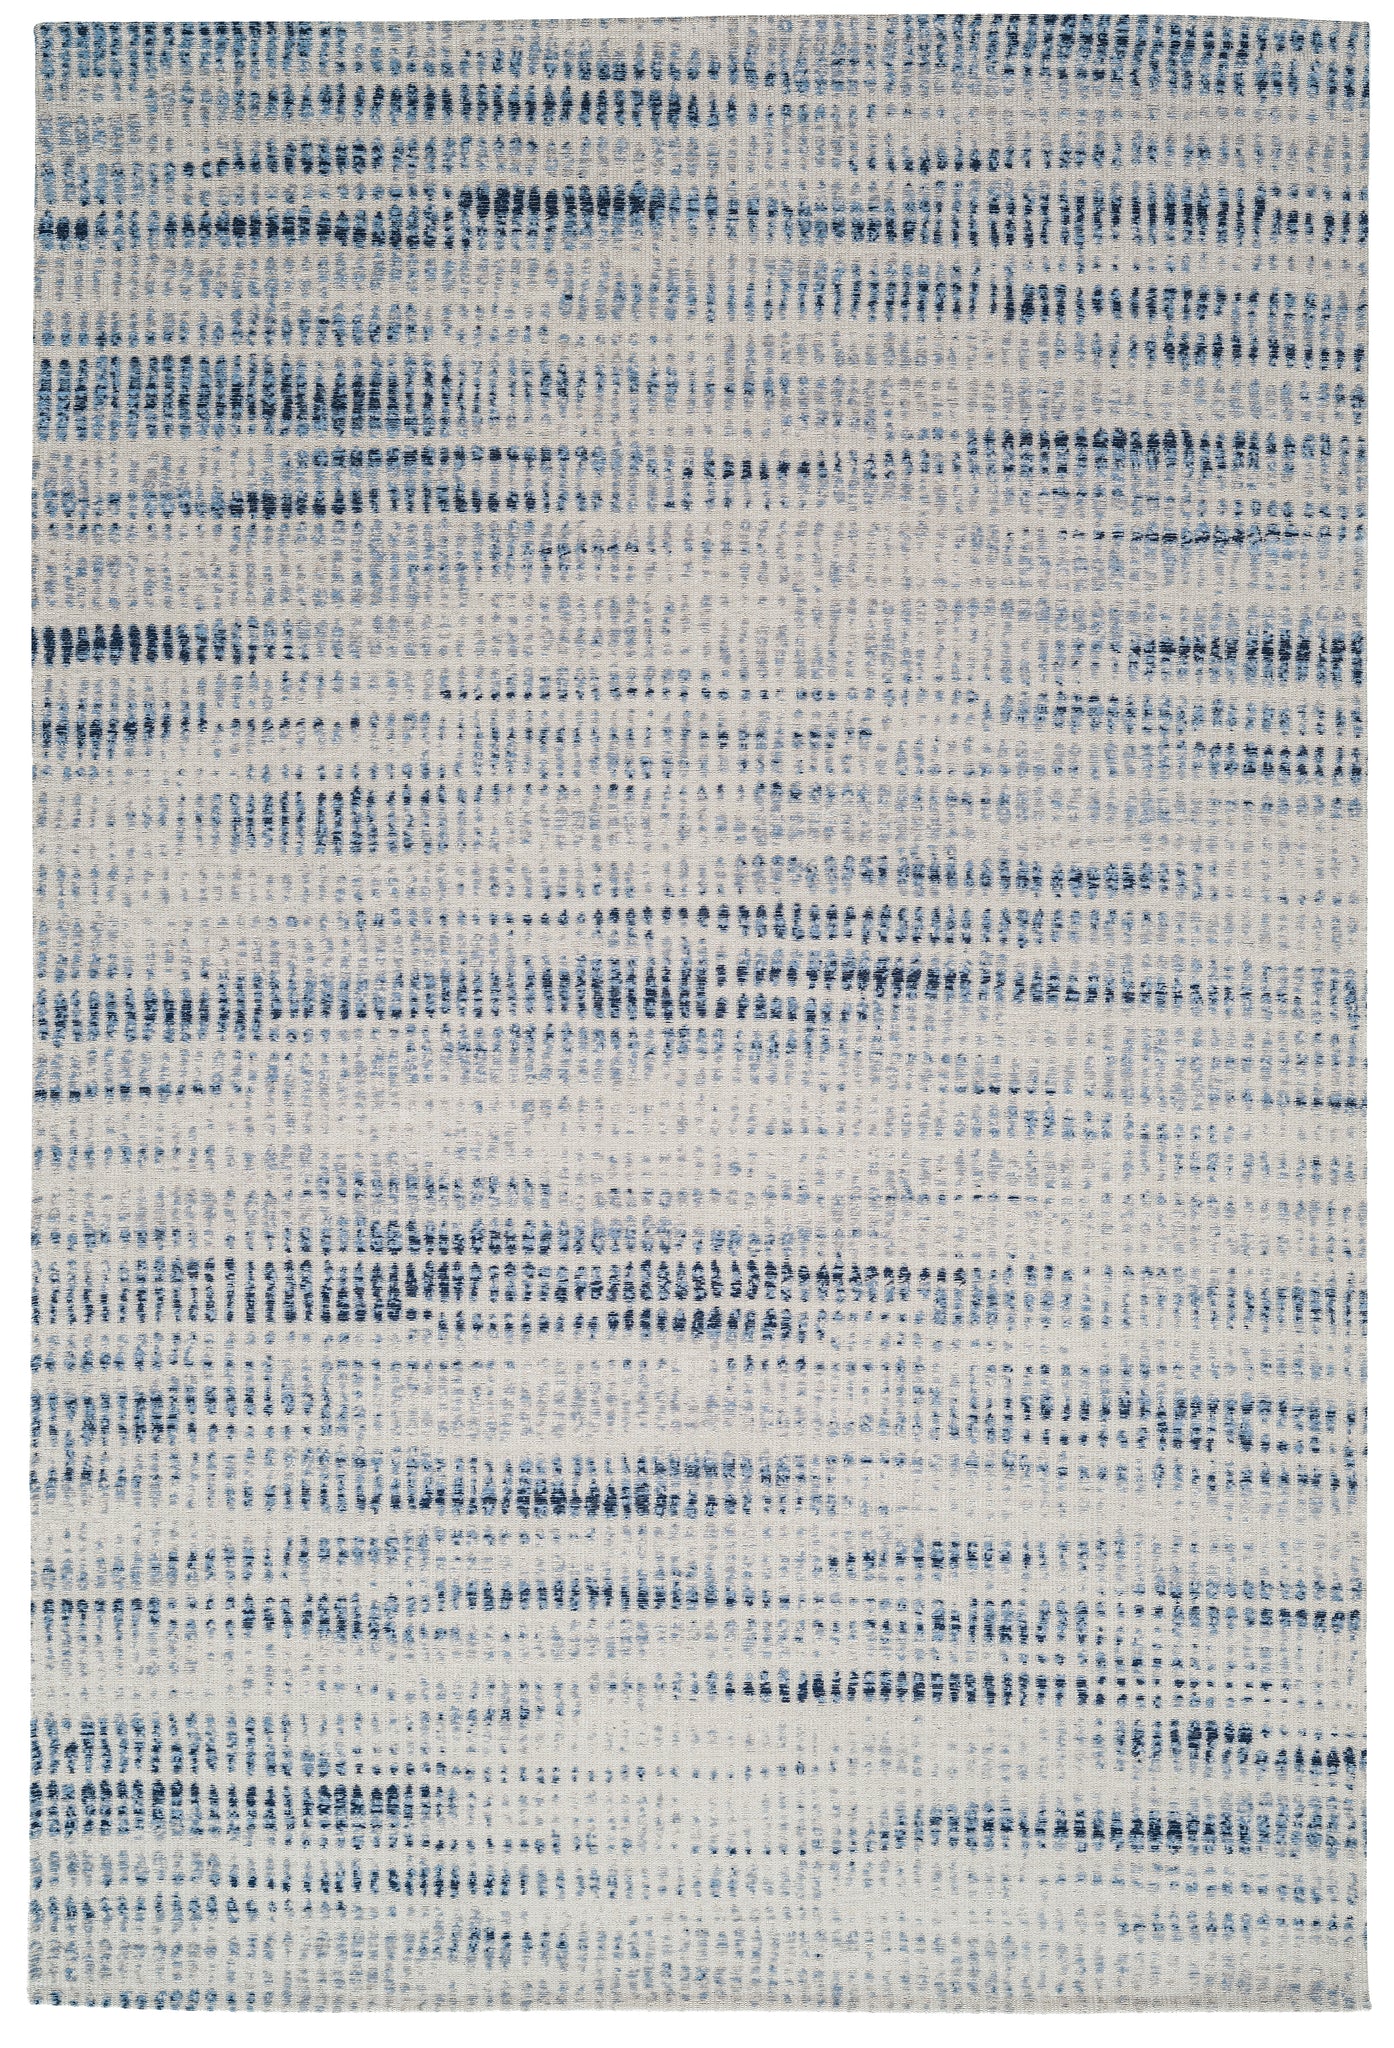 Washable Area rug | The Jacquard Rhapsody | Abstract Pattern with Navy & Gray tones | 8x10 | By MotherRuggers.com | Machine Washable | Jacquard Woven | Pet Friendly | Kid Friendly | Machine Wash | Line Dry | Living Room | Kitchen | Bedroom | High-Traffic | Anti-Slip | Three-year warranty with proper care | Shake or light Vacuum | Machine Wash as needed | Dry Flat or Line Dry | Dries fast